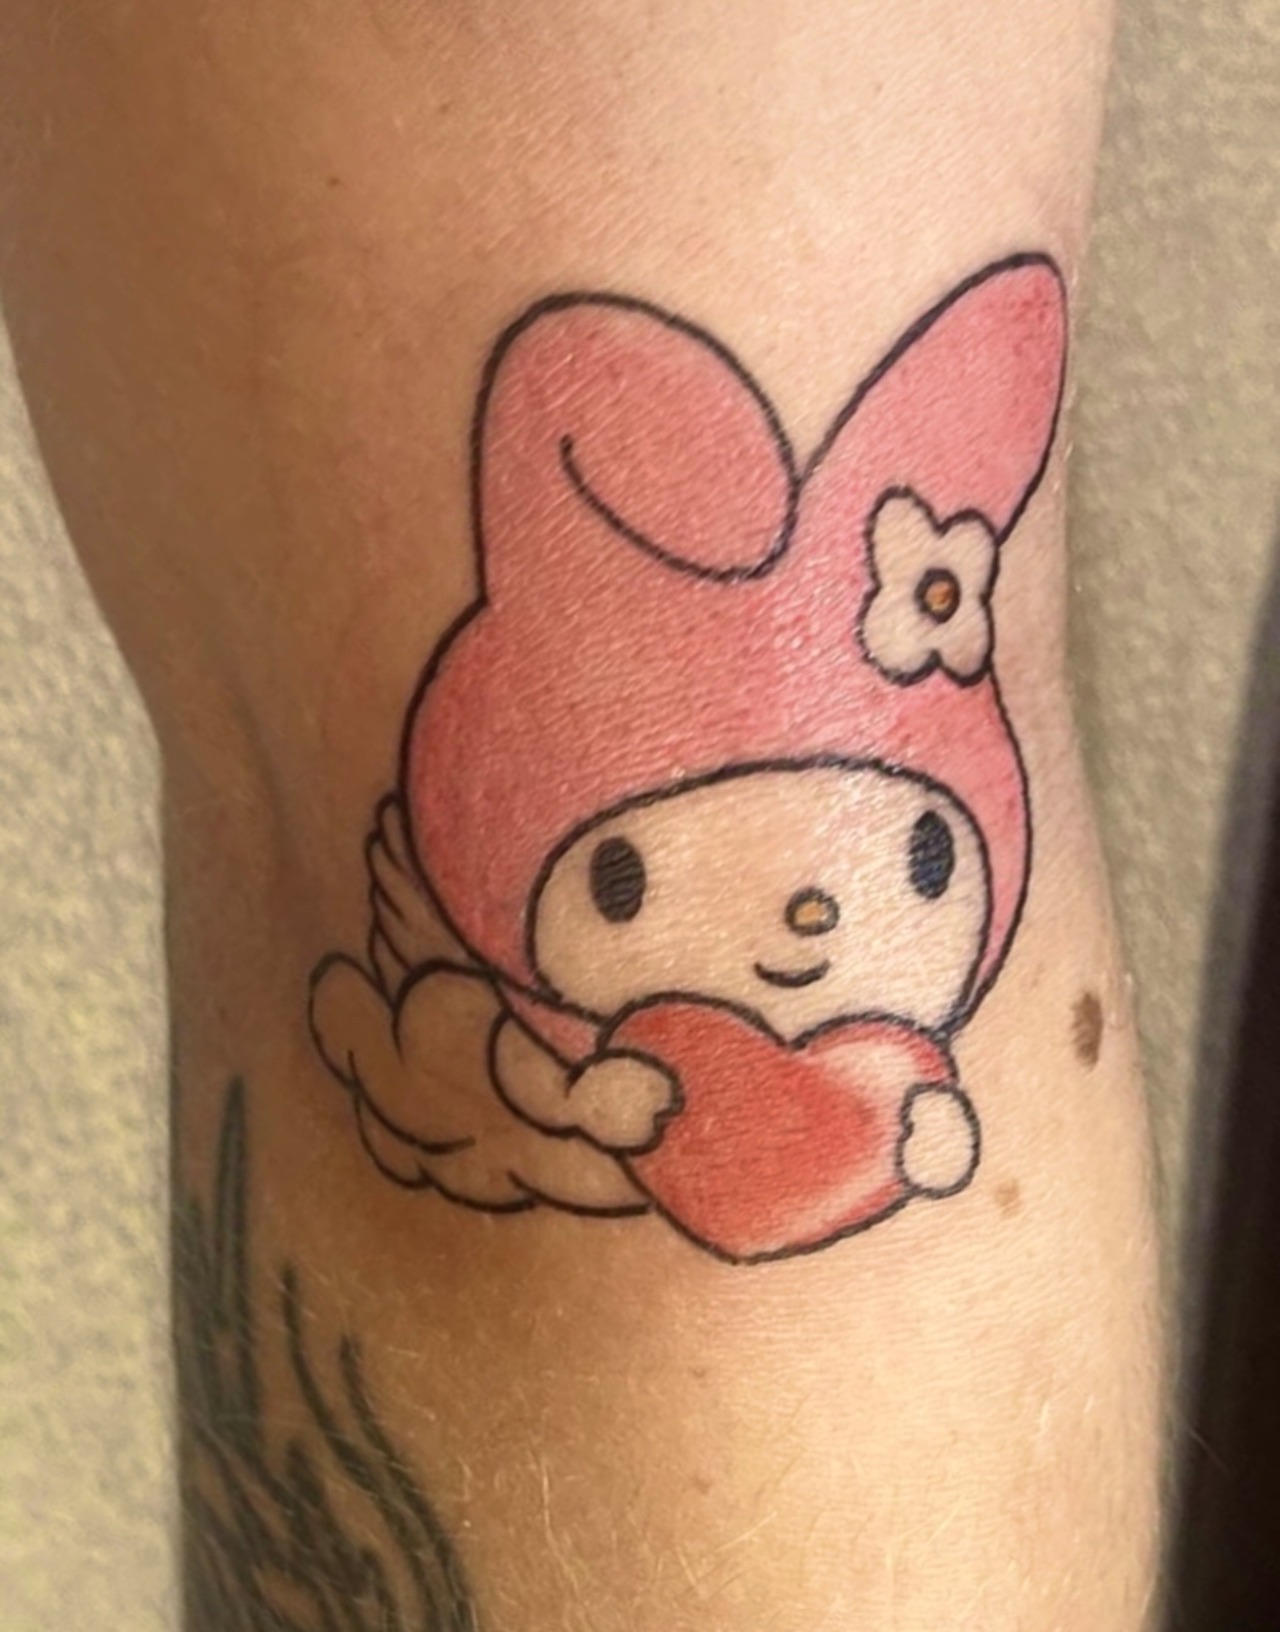 Tattoo uploaded by Pi lanlan    MELODY  KUROMI   I drew  this picture two years ago Thanks to meimeihairstylist for getting it  I have always wanted to do